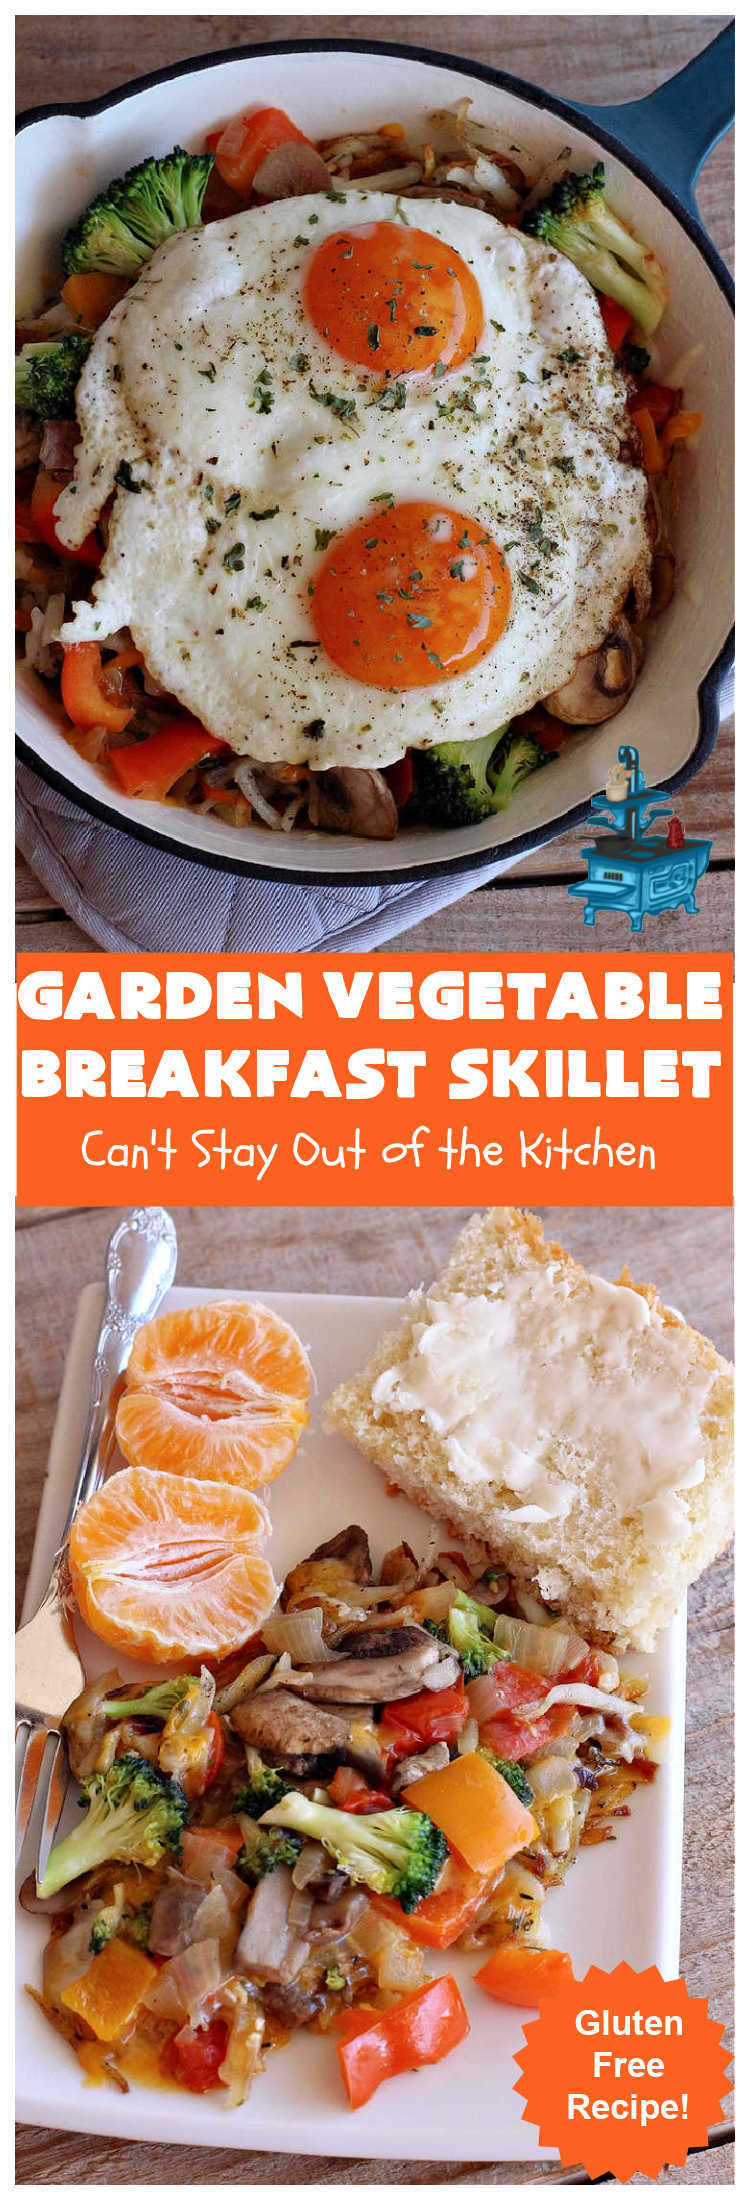 Garden Vegetable Breakfast Skillet | Can't Stay Out of the Kitchen